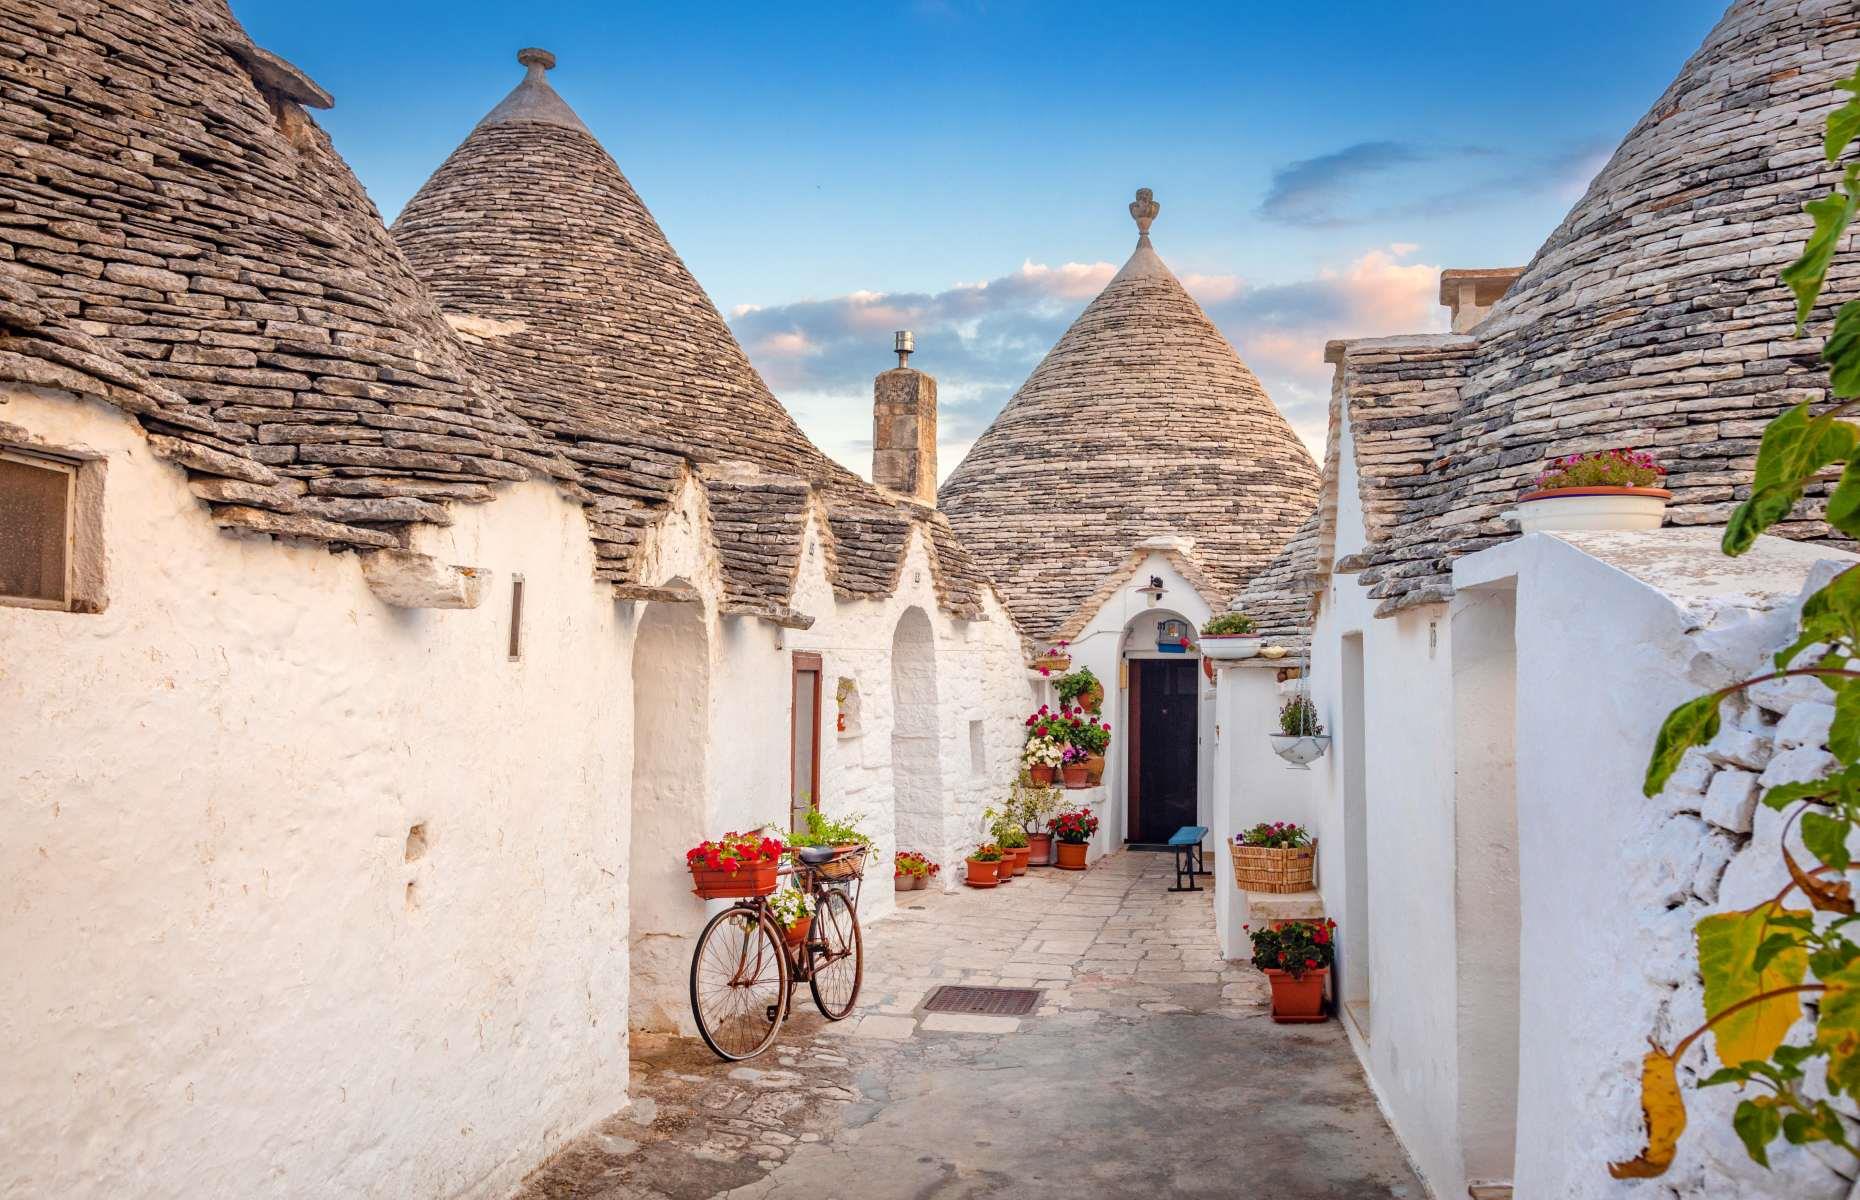 <p>Also in the Valle d’Itria, Alberobello is famous for one thing: its conical limestone trulli dwellings. Inscribed on the UNESCO World Heritage list, which describes them as “remarkable examples of drywall (mortarless) construction, a prehistoric building technique still in use in this region”, trulli have been here since the mid-14th century. The town is touristy but charming, especially early in the morning, and if you head to Rione Aia Piccola – the small yard district – you’ll escape the crowds.</p>